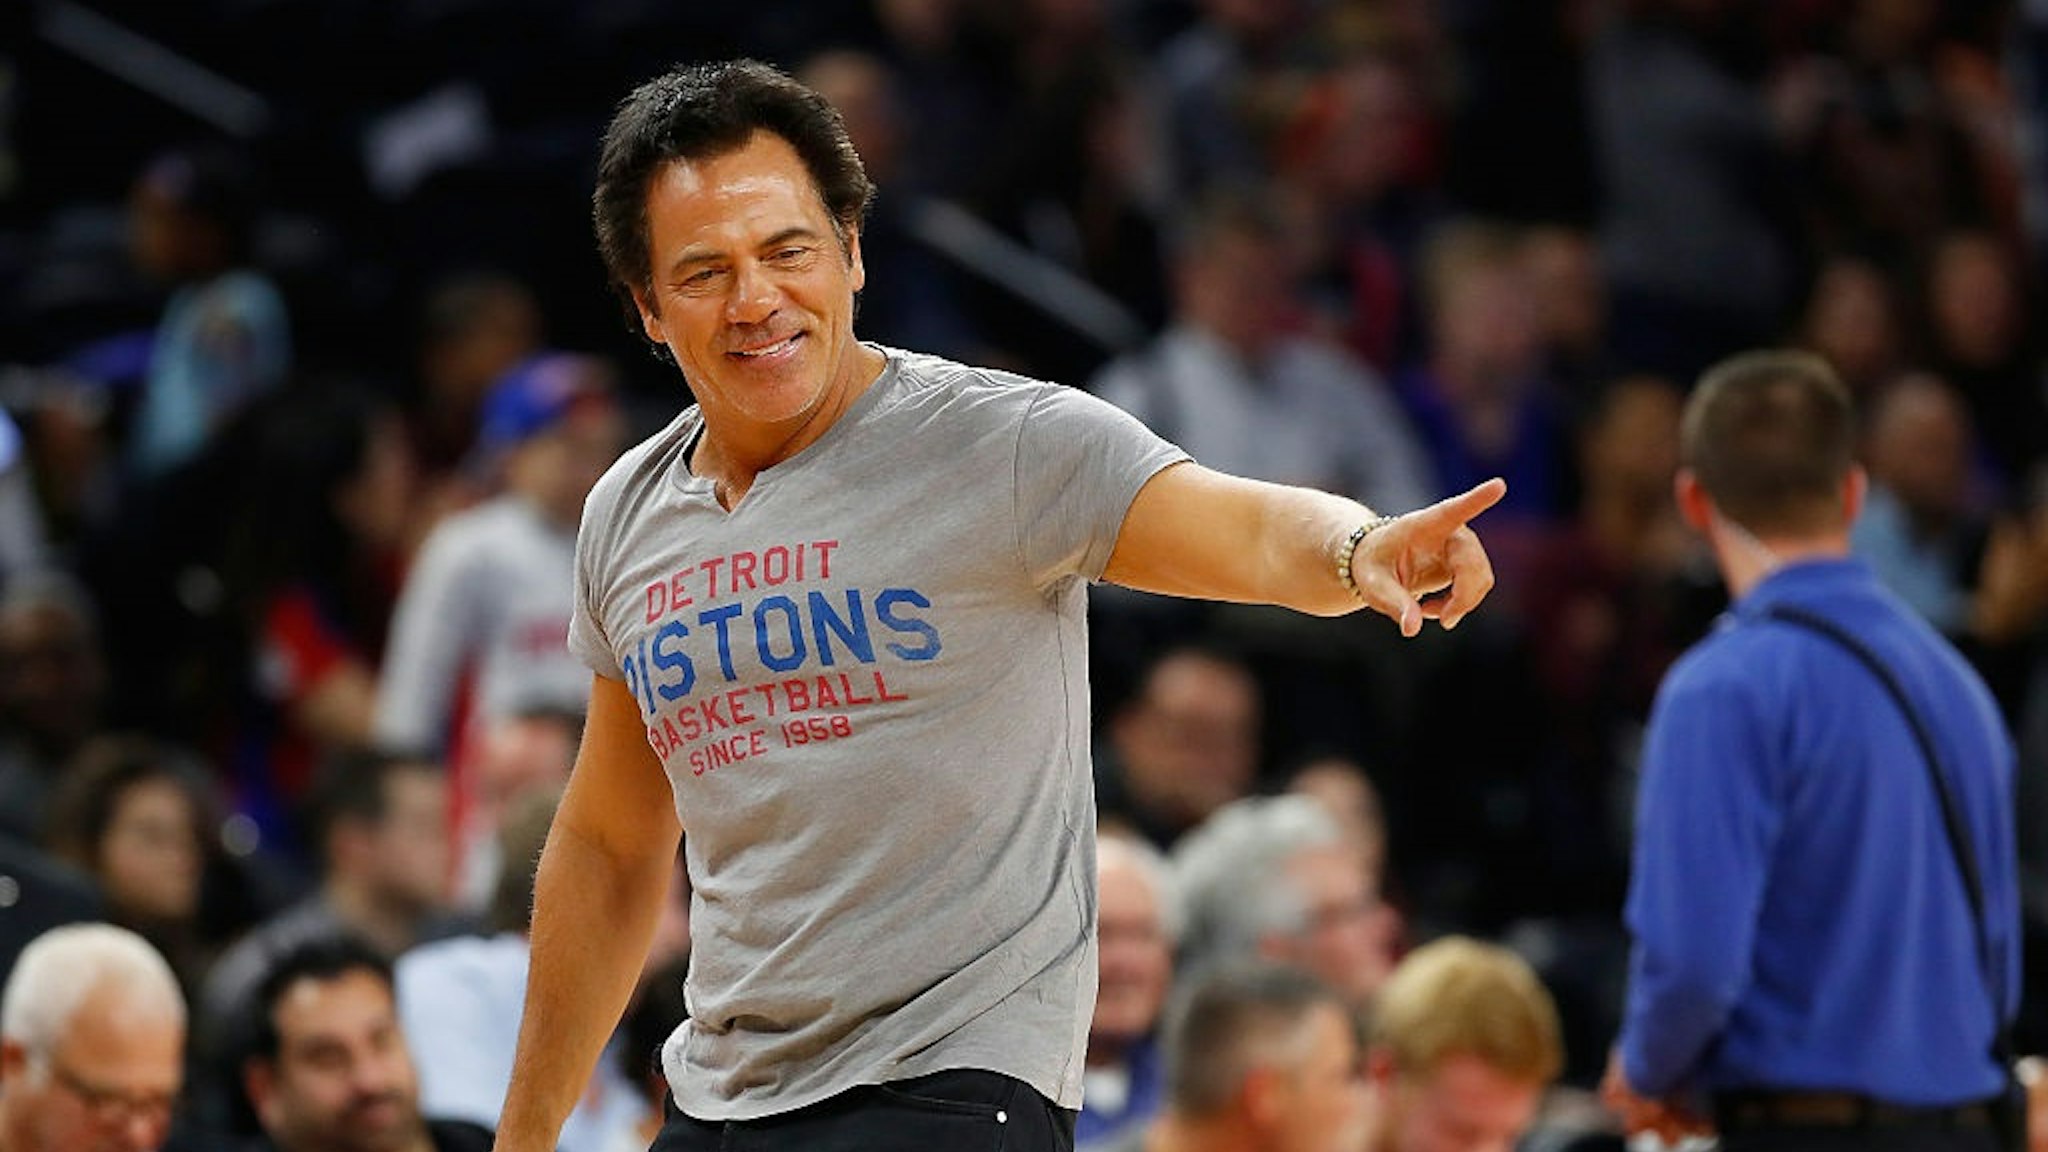 AUBURN HILLS, MI - OCTOBER 28: Detroit Pistons owner Tom Gores throws tee shits into the stands during the Detroit Pistons home opener against the Orlando Magic at the Palace of Auburn Hills on October 28, 2016 in Auburn Hills, Michigan.